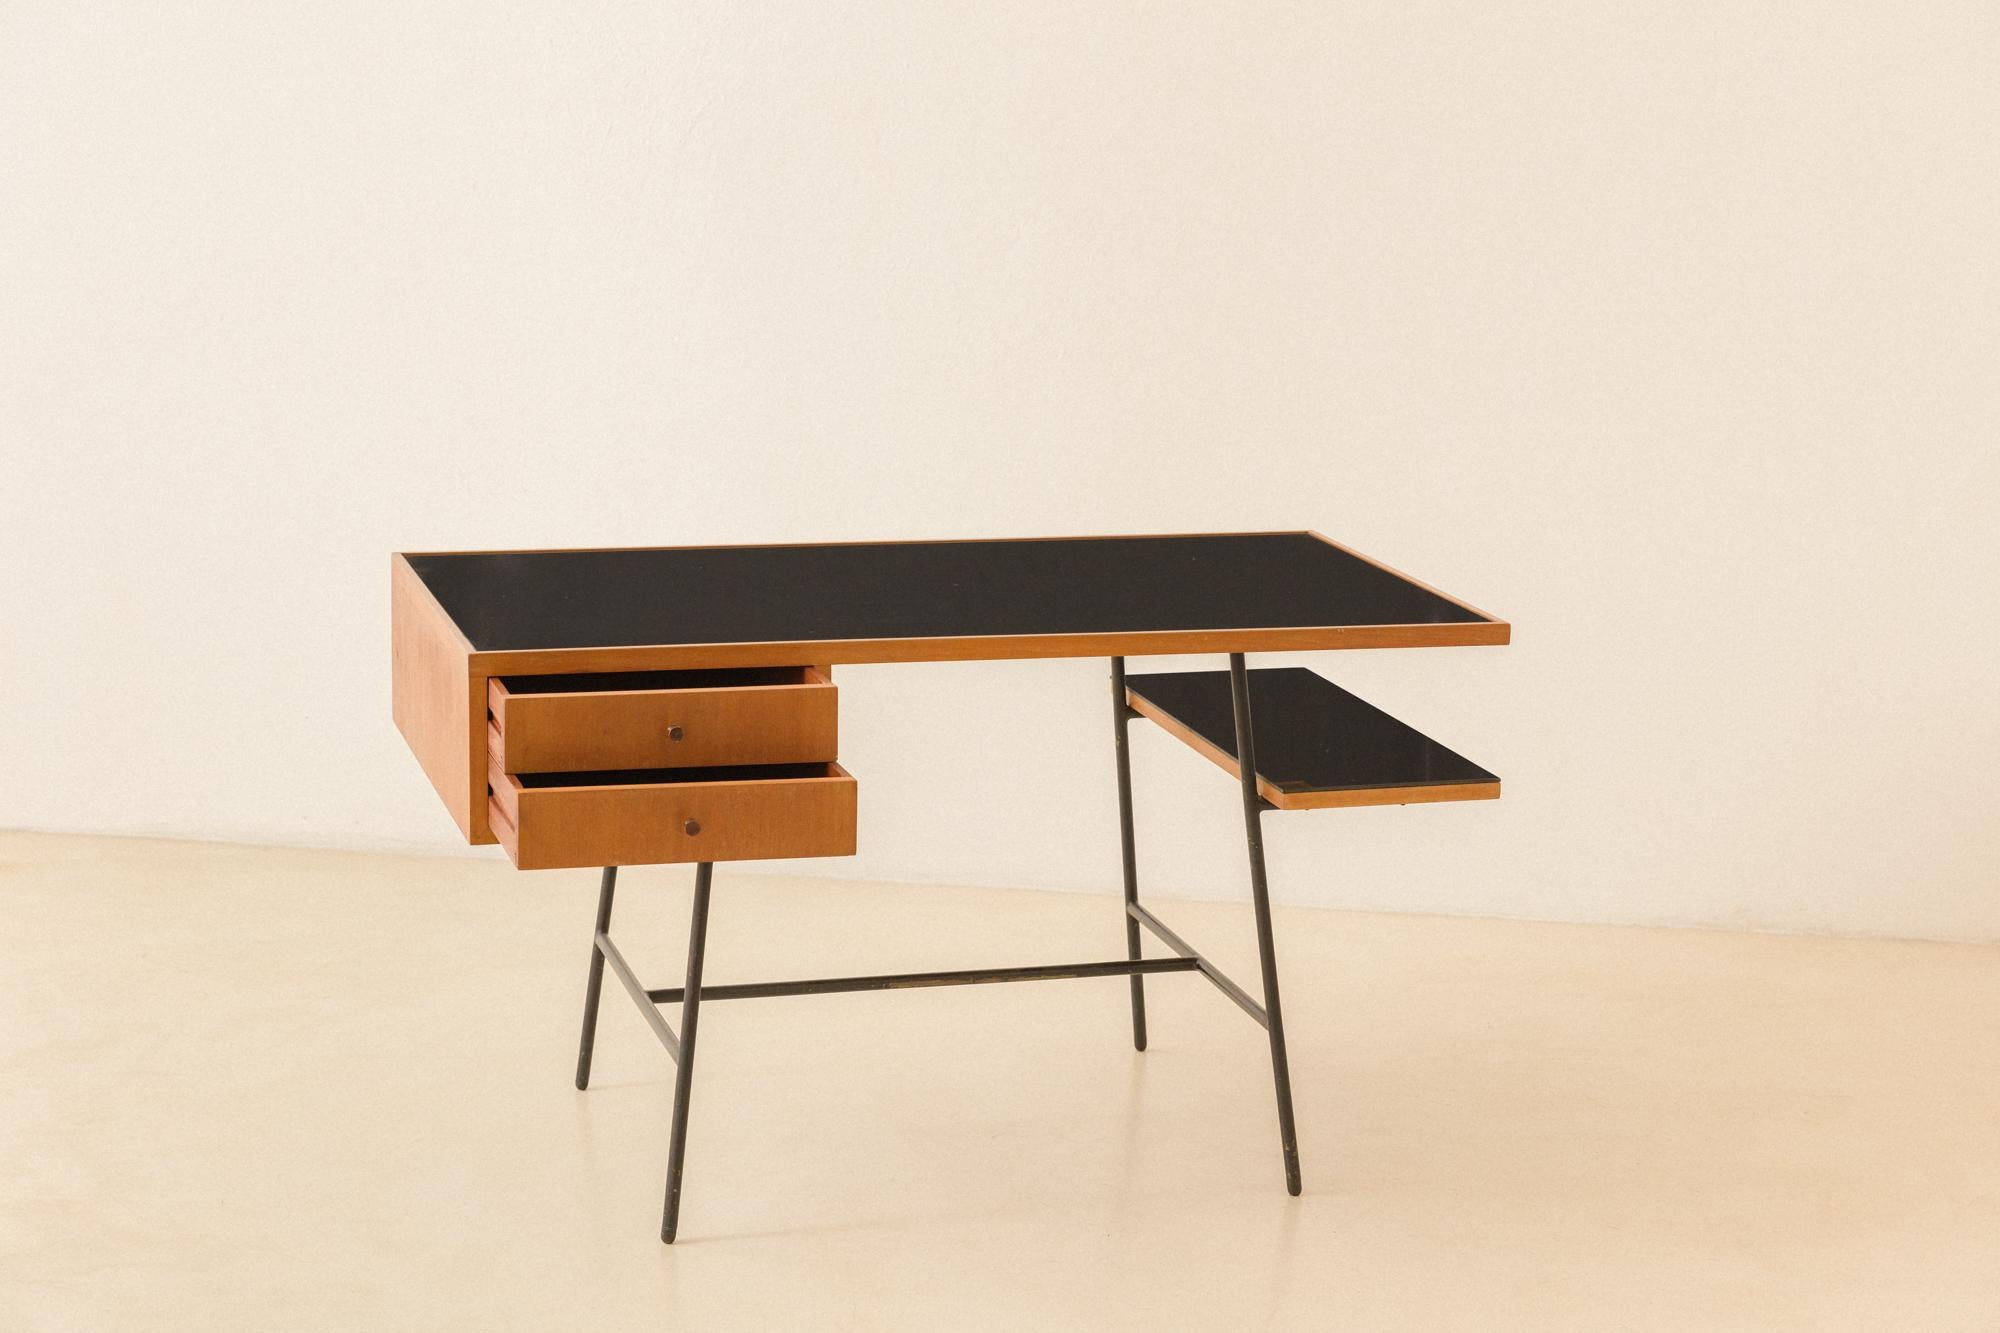 This desk was designed between 1950 and 1953 and stood out within the production of Hauner and Eisler's Móveis Artesanal. The desk has an iron structure with a top in Pau-marfim wood and painted-black glass tops, with two drawers and a shelf.